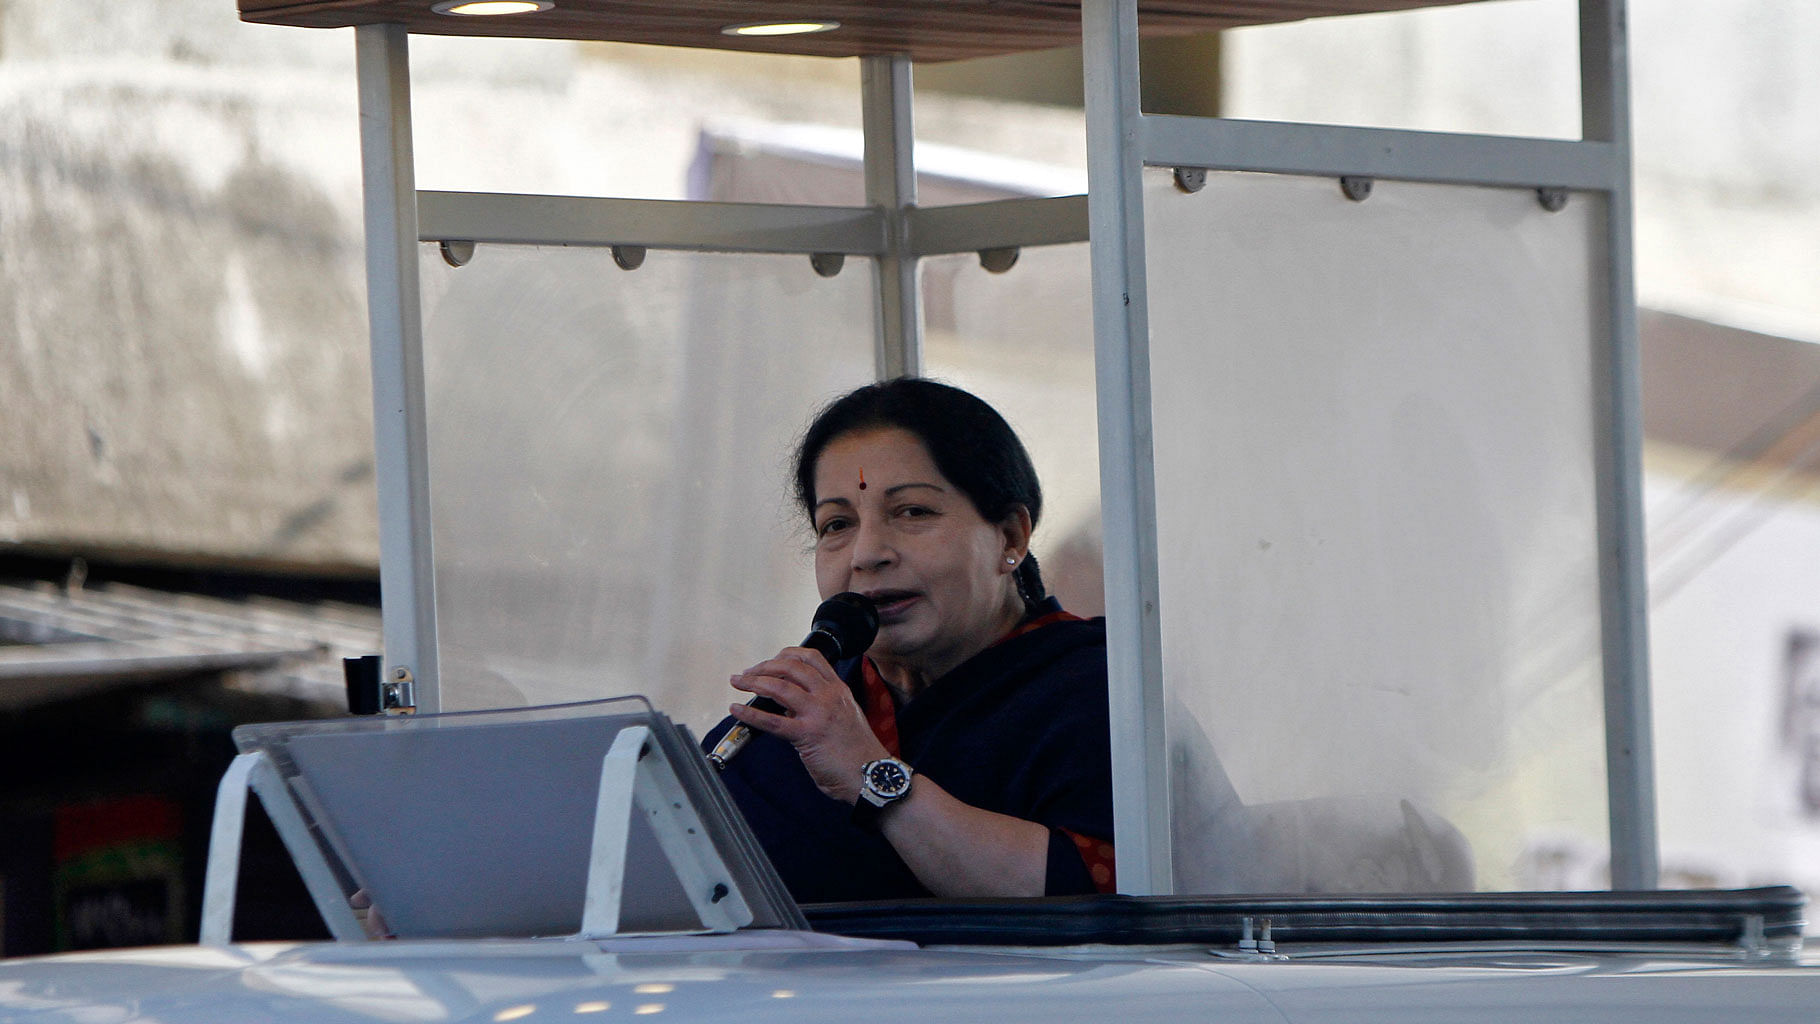 Tamil Nadu Chief Minister J Jayalalithaa was admitted in Apollo hospital. (Photo: Reuters)